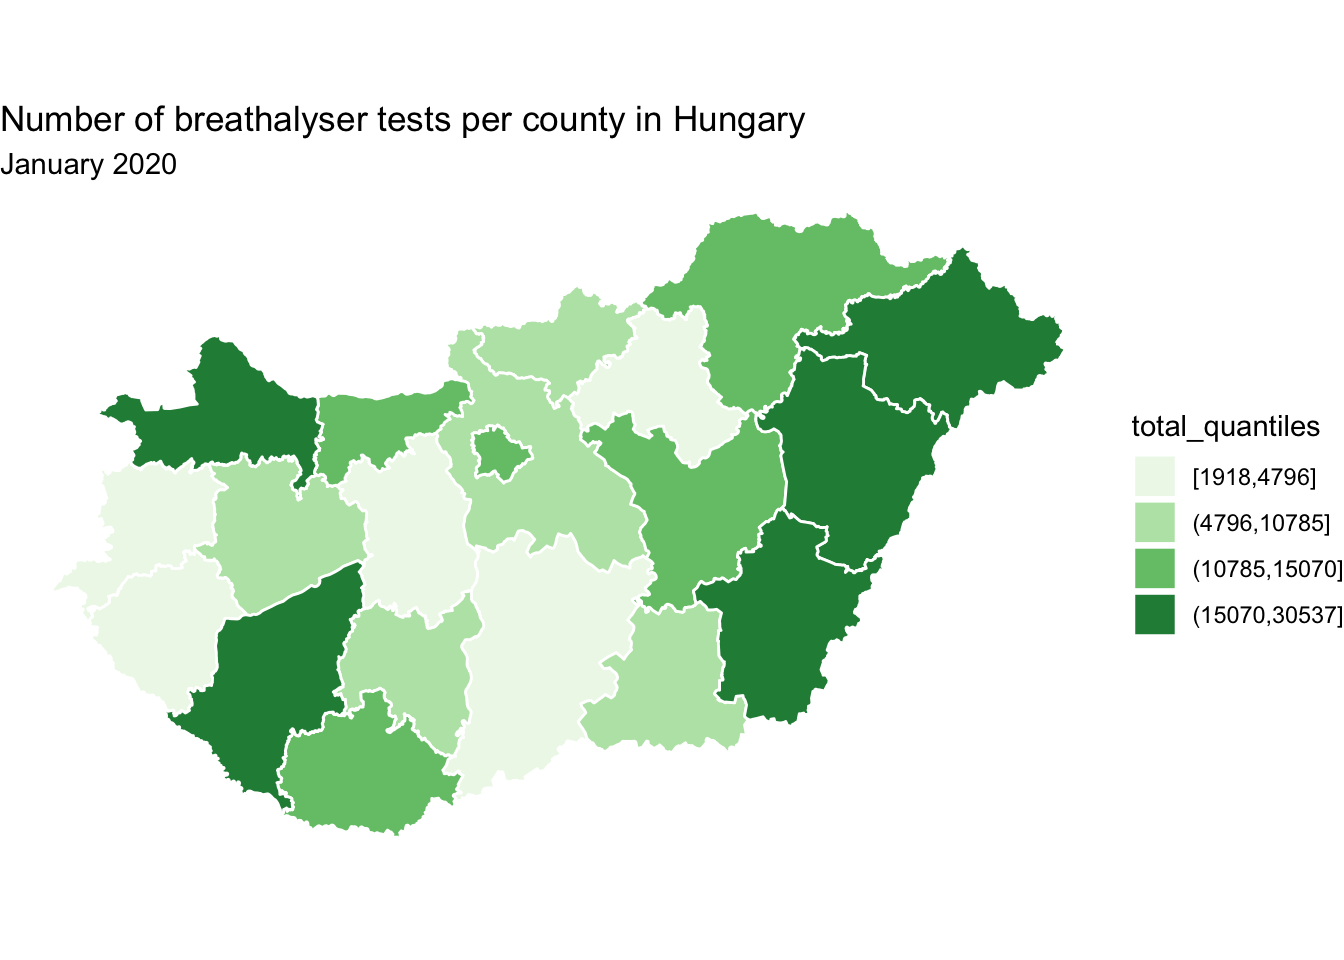 The previous green map now has a title, 'Number of breathalyser tests per county in Hungary', and a subtitle 'January 2020'.